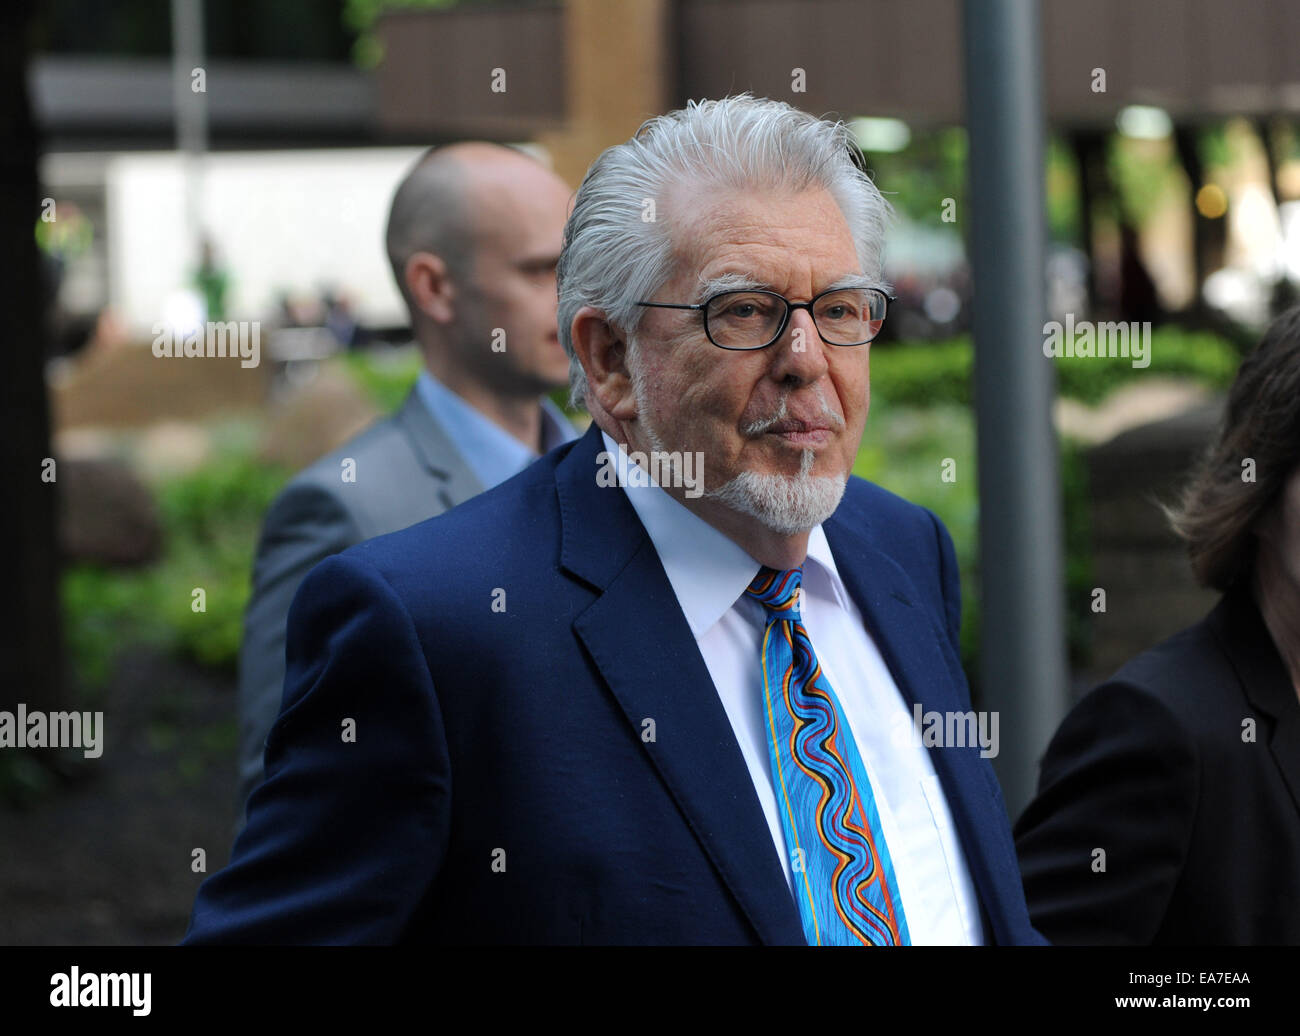 Rolf Harris arriving at Southwark Crown Court in South London  Featuring: Rolf Harris Where: London, United Kingdom When: 06 May 2014 Stock Photo